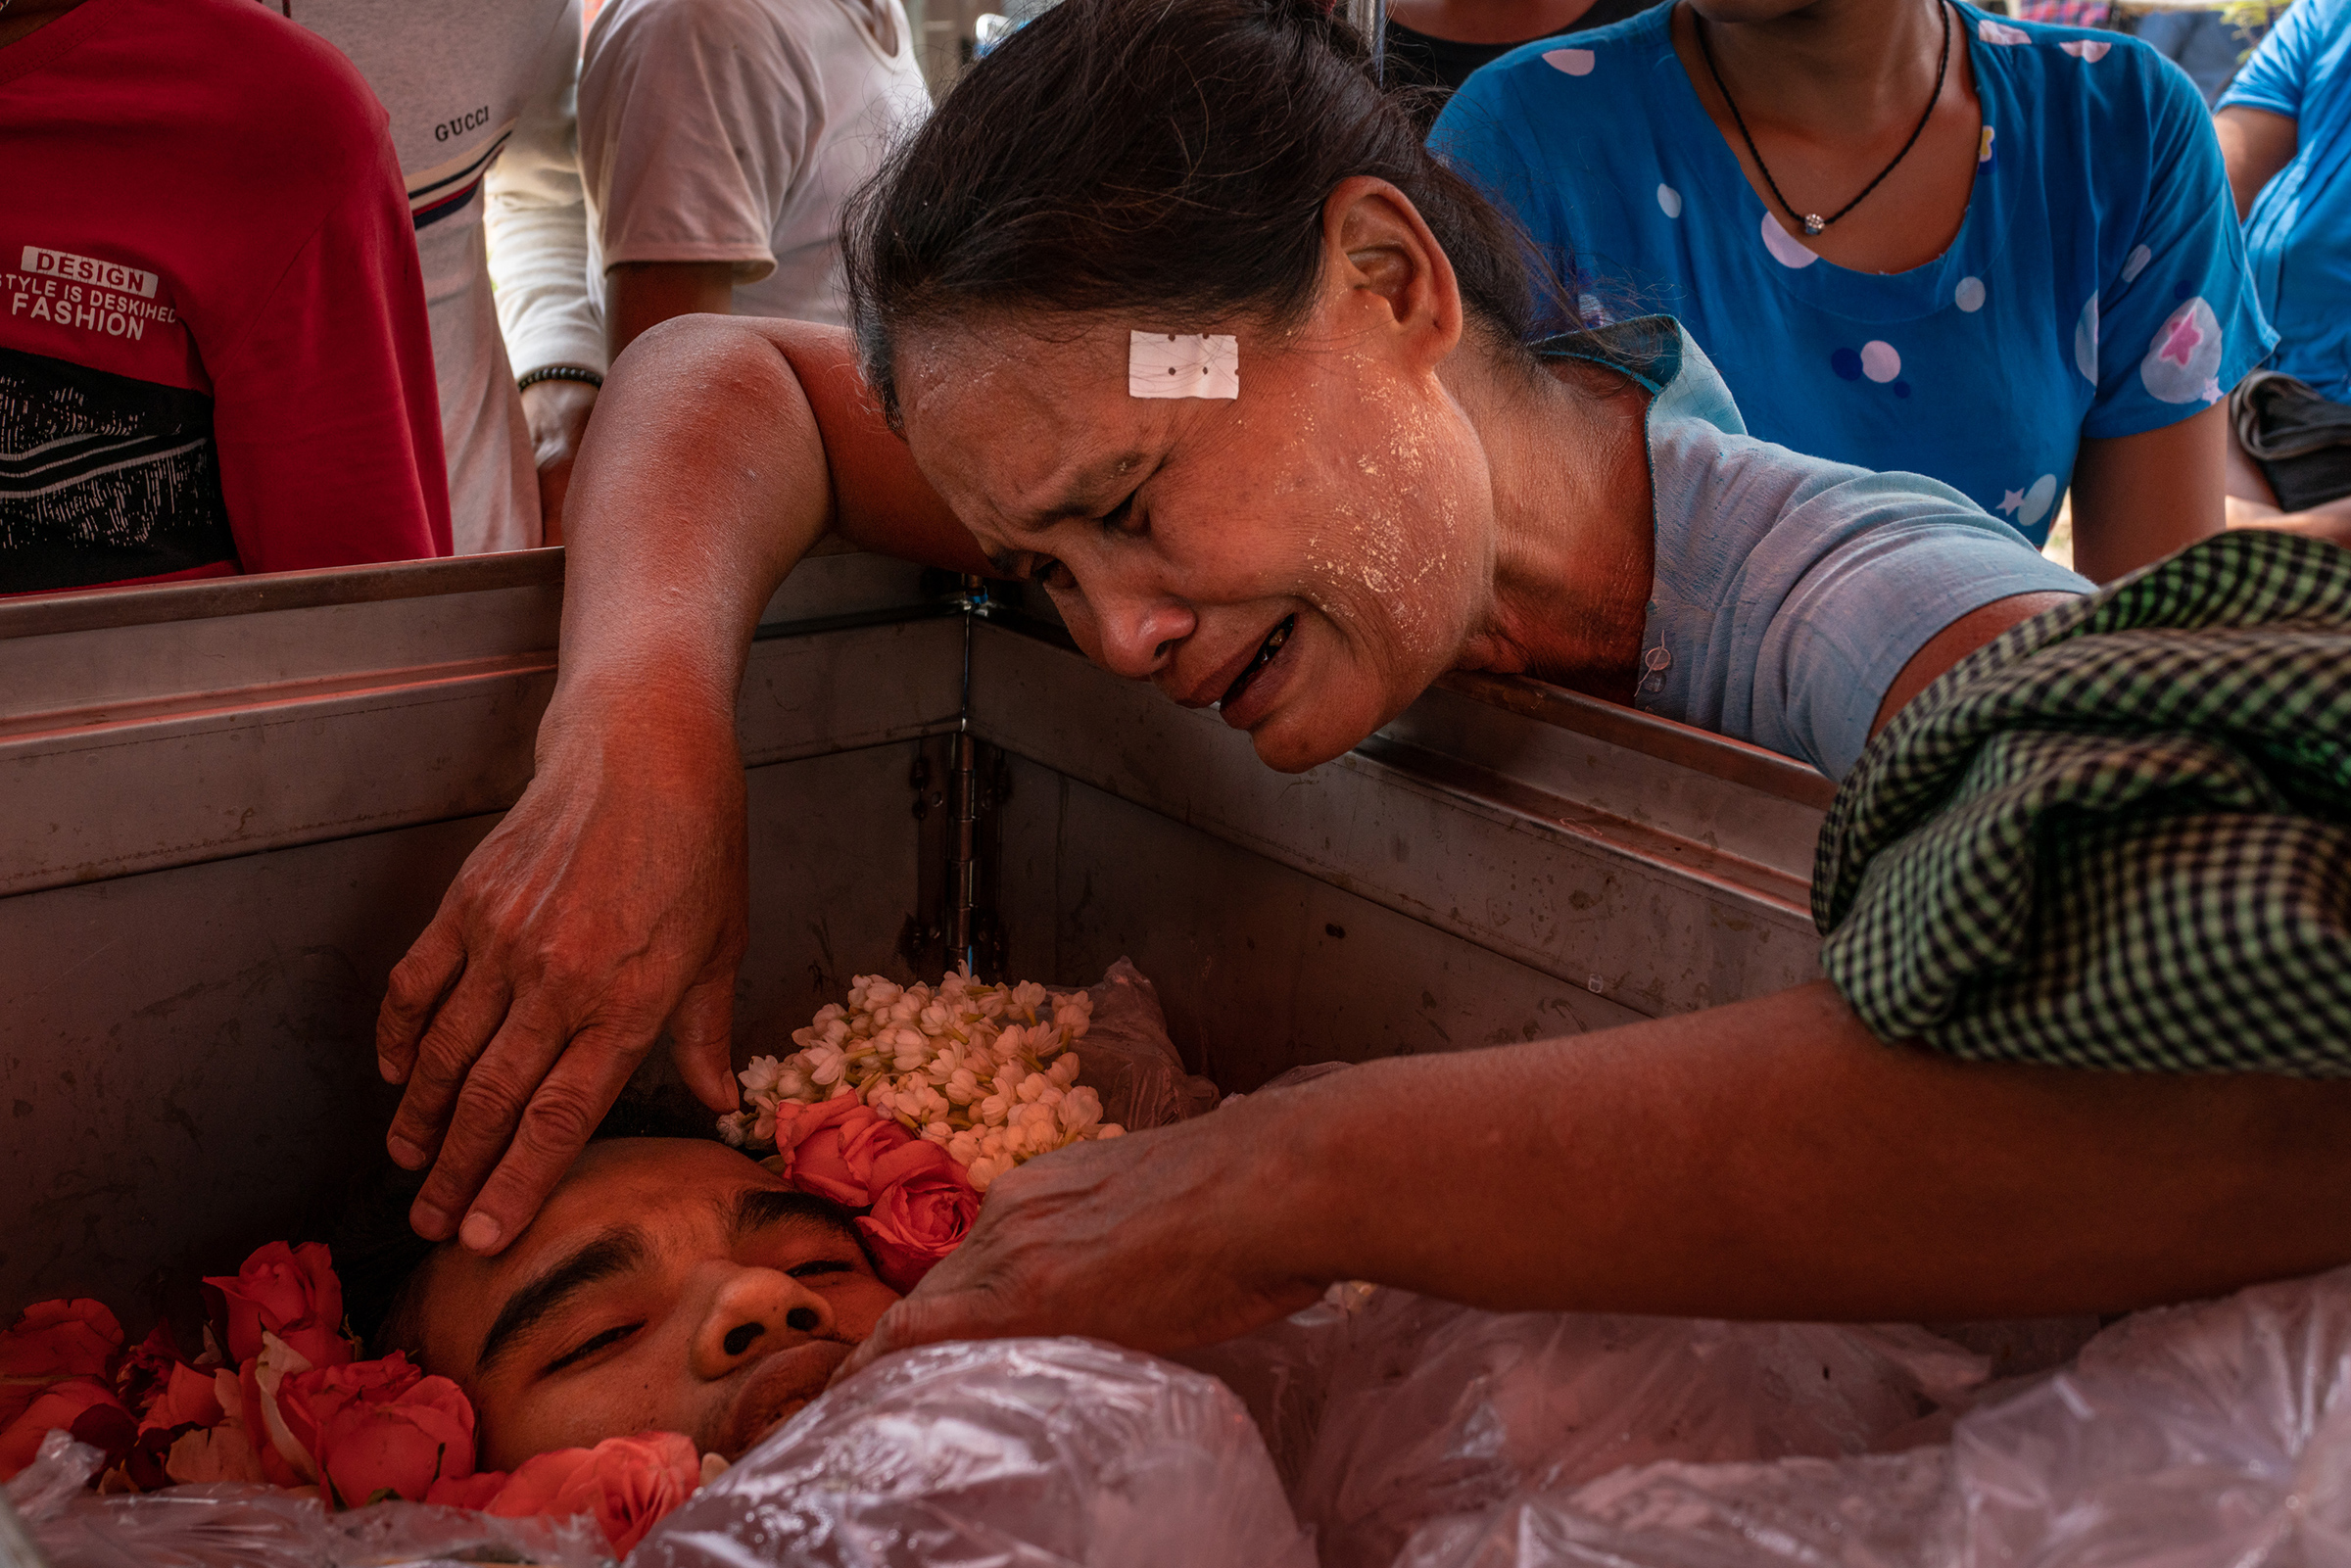 The mother of Aung Zay Min, a 20-year-old who was shot and killed by security forces, mourns over his body at his funeral in Dala township, outside Yangon, Myanmar, on March 27, 2021. (Getty Images)